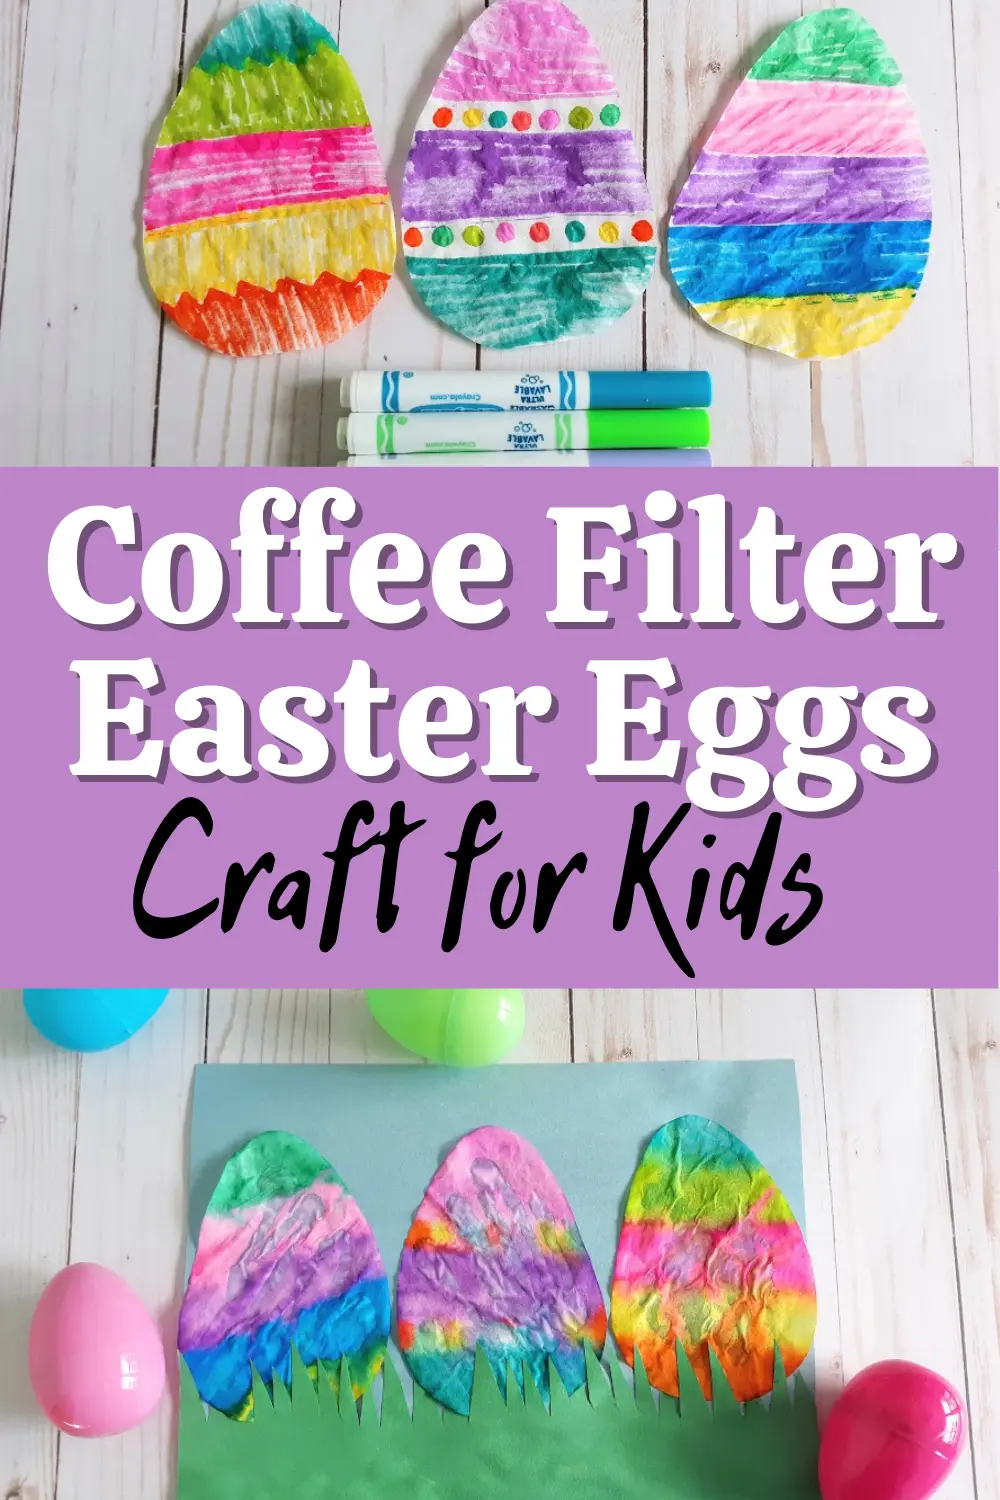 Three coffee filter egg shapes colored with markers lined up next to each other above some markers. White and black text over light purple rectangle in the middle says Coffee Filter Easter Eggs Craft for Kids. Bottom shows three finished coffee filter Easter eggs glued to blue construction paper with green fringe cut construction paper along the bottom. Plastic eggs laying around the craft project.